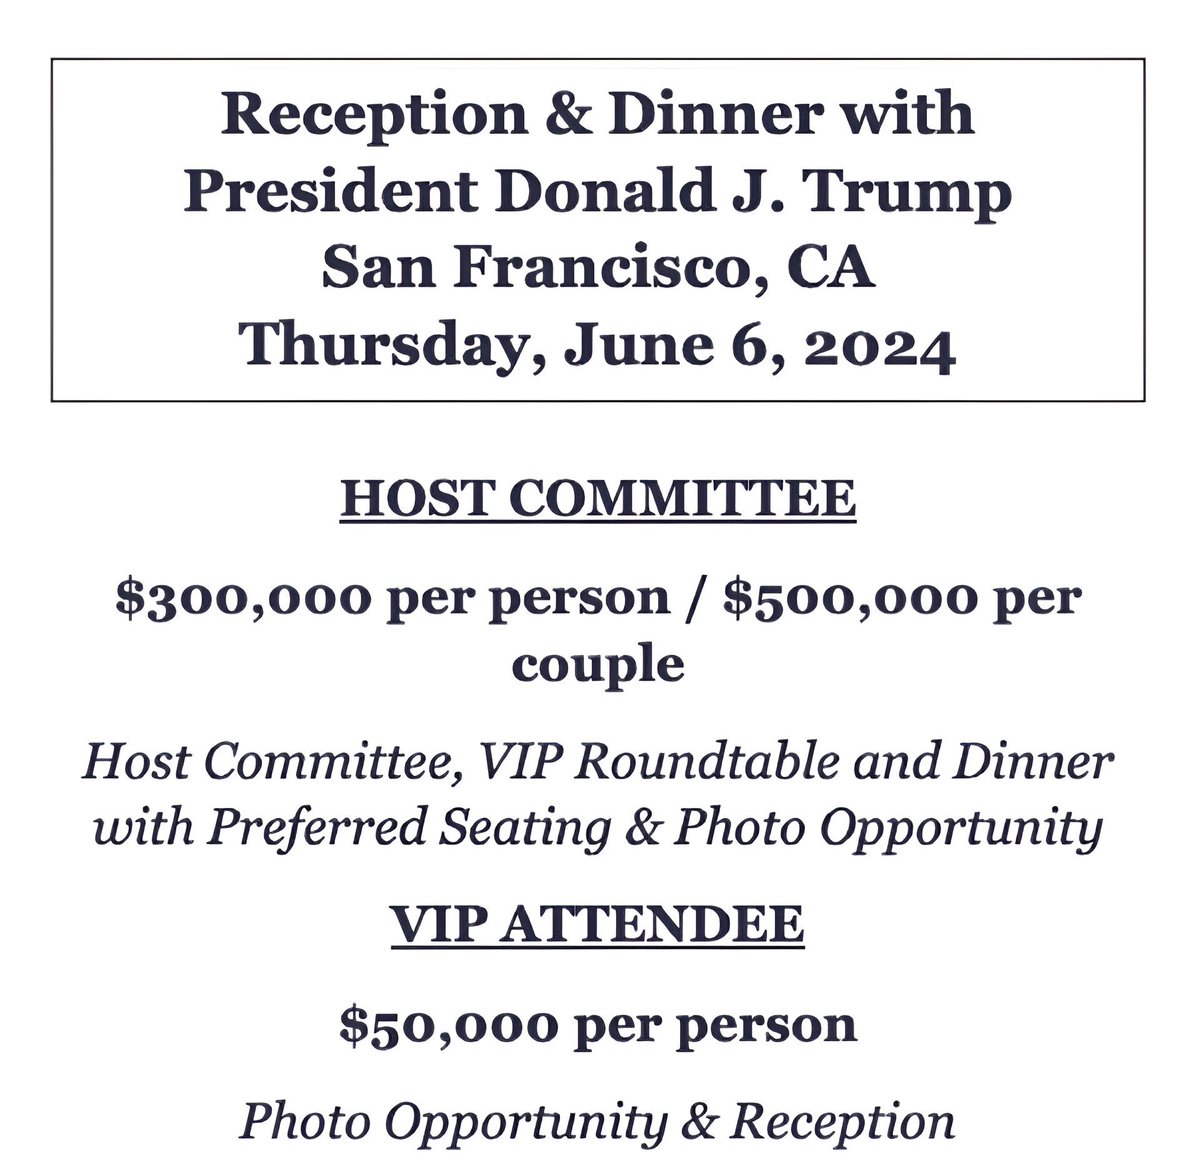 NEWS — The Donald J. Trump fundraiser in San Francisco is officially happening. June 6. Hosts: @DavidSacks and @chamath. Tickets — up to $500,000 a couple. Invite here.